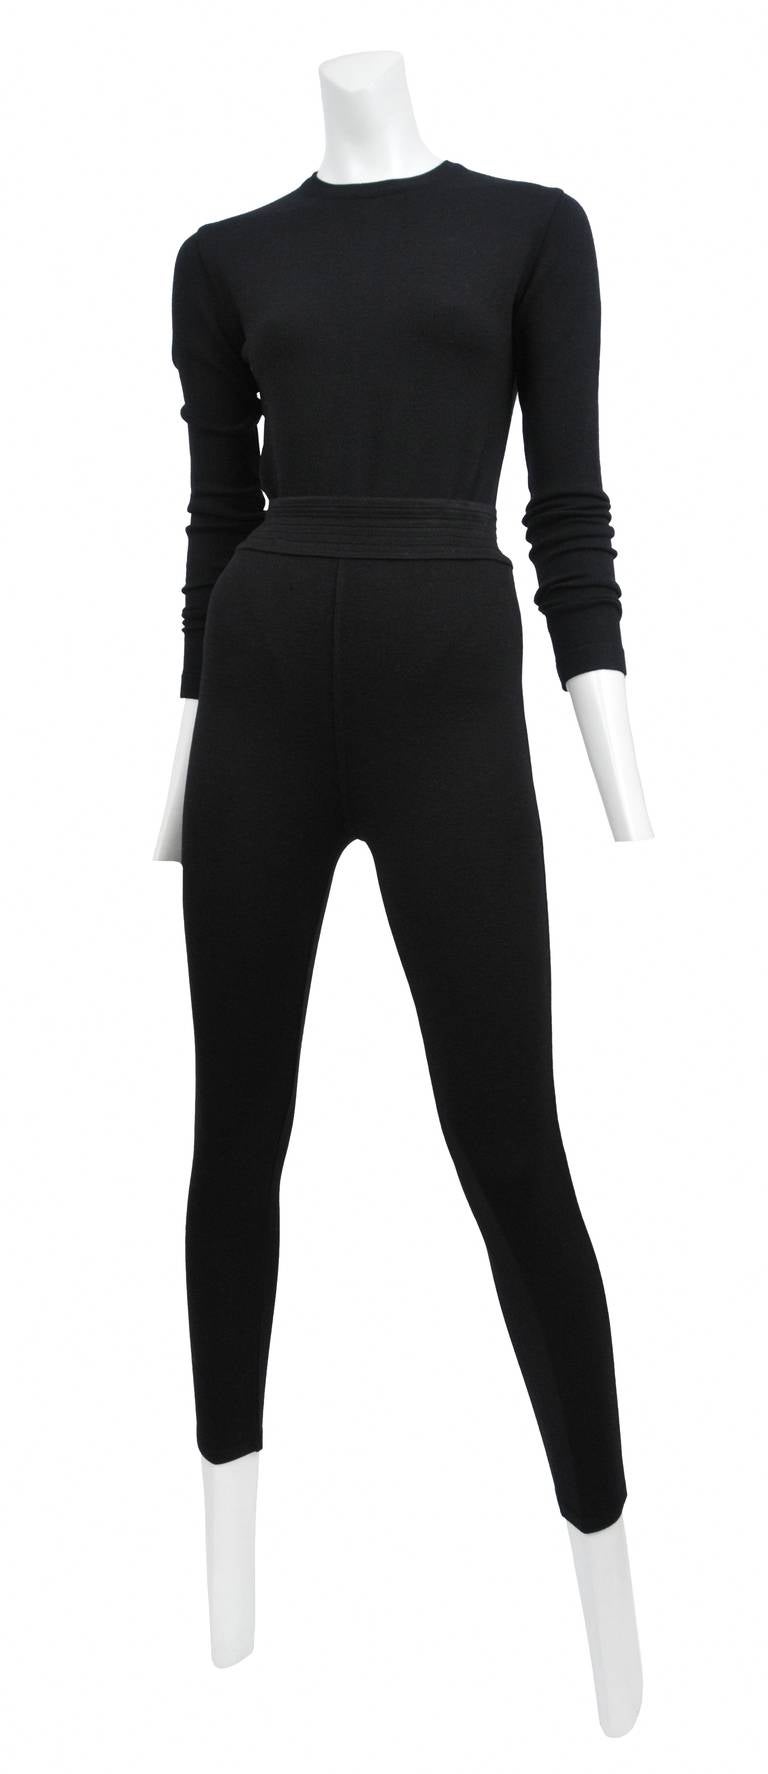 Alaia black knit high waisted leggings set shown with its matching black long sleeve bodysuit. So adorable paired with an Alaia leather belt! 

Measurements: 32